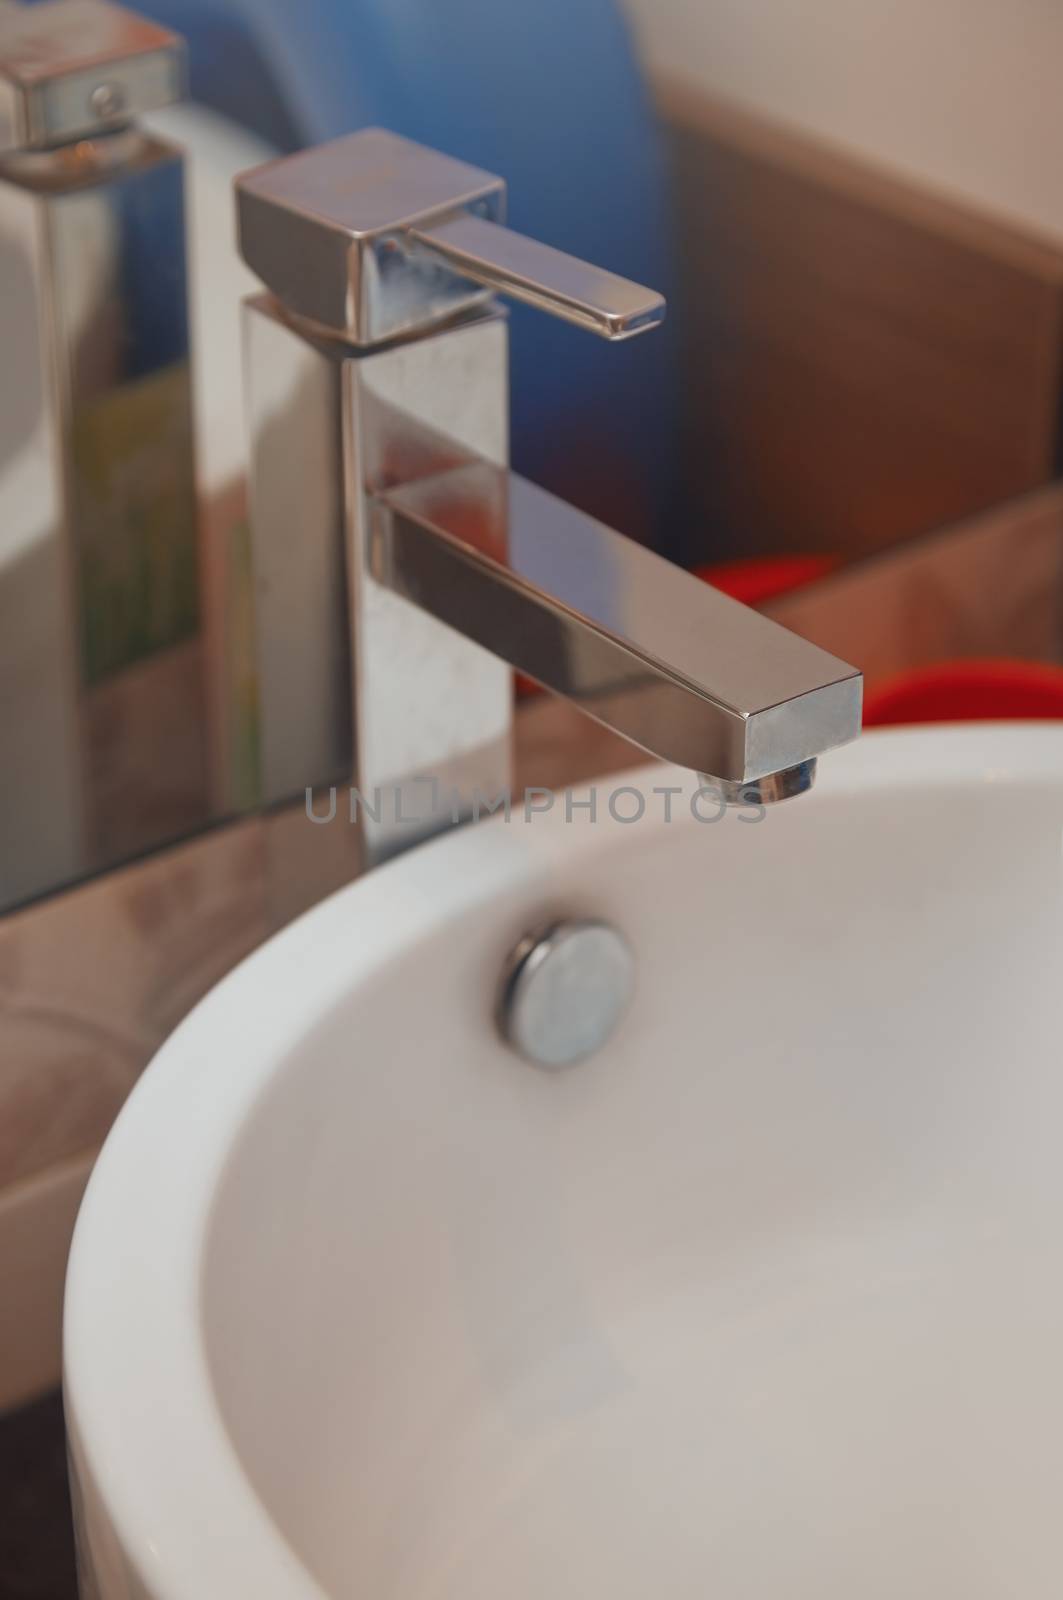 Sink and water tap. Horizontal close-up photo